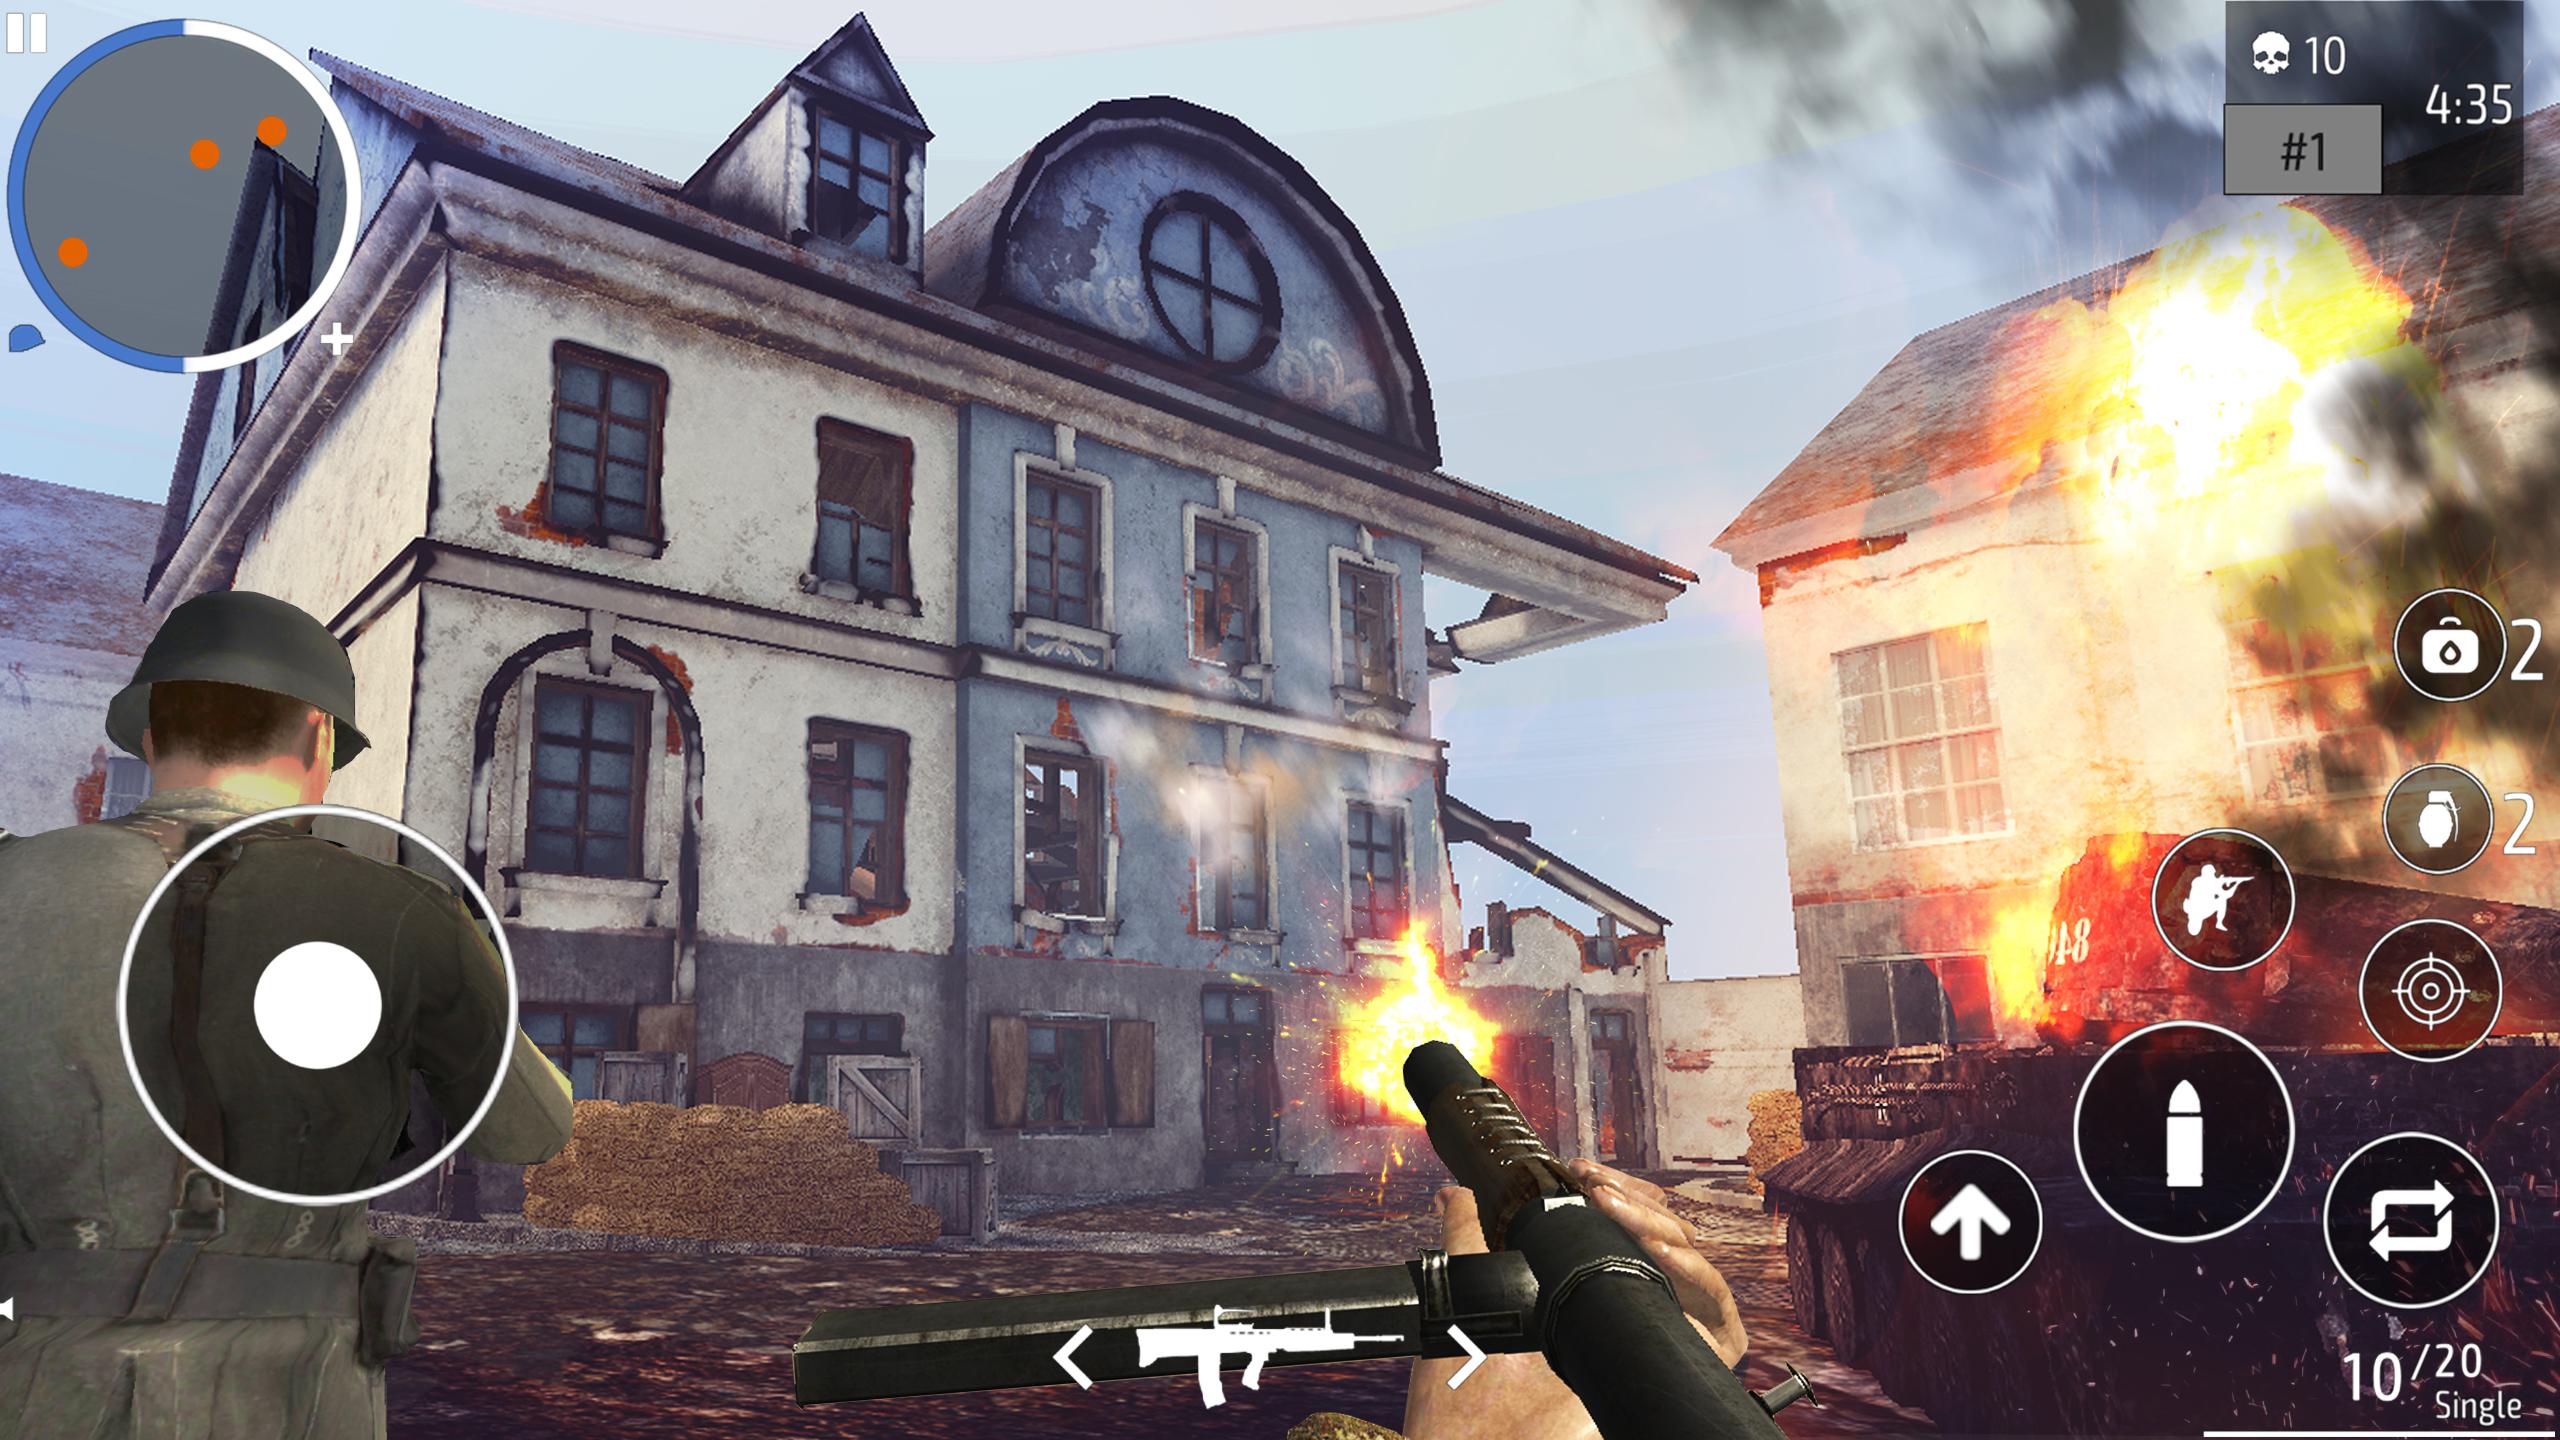 MAD Battle Royale, shooter Game for Android - Download